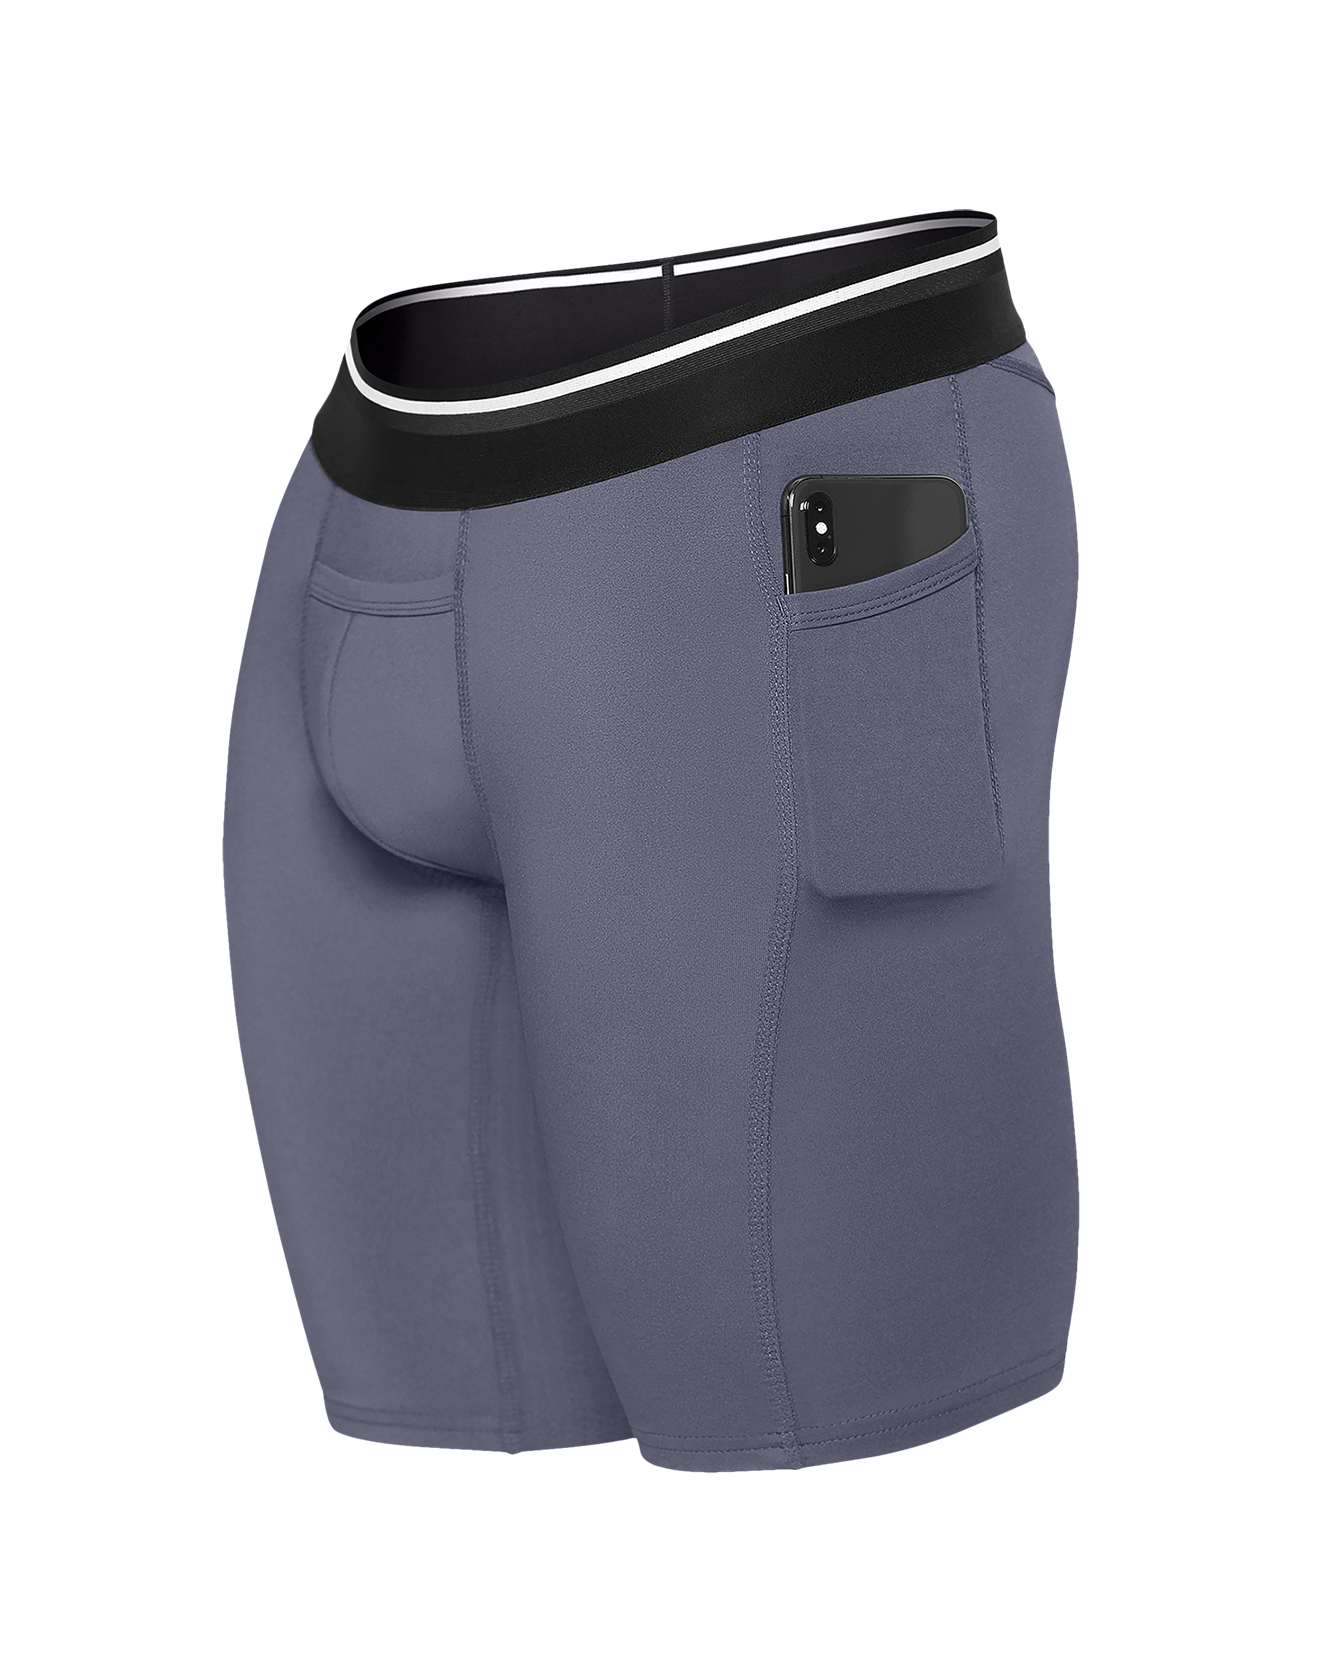 Endurance Compression Shorts Men– Baselayer|All Athletic for Citizens